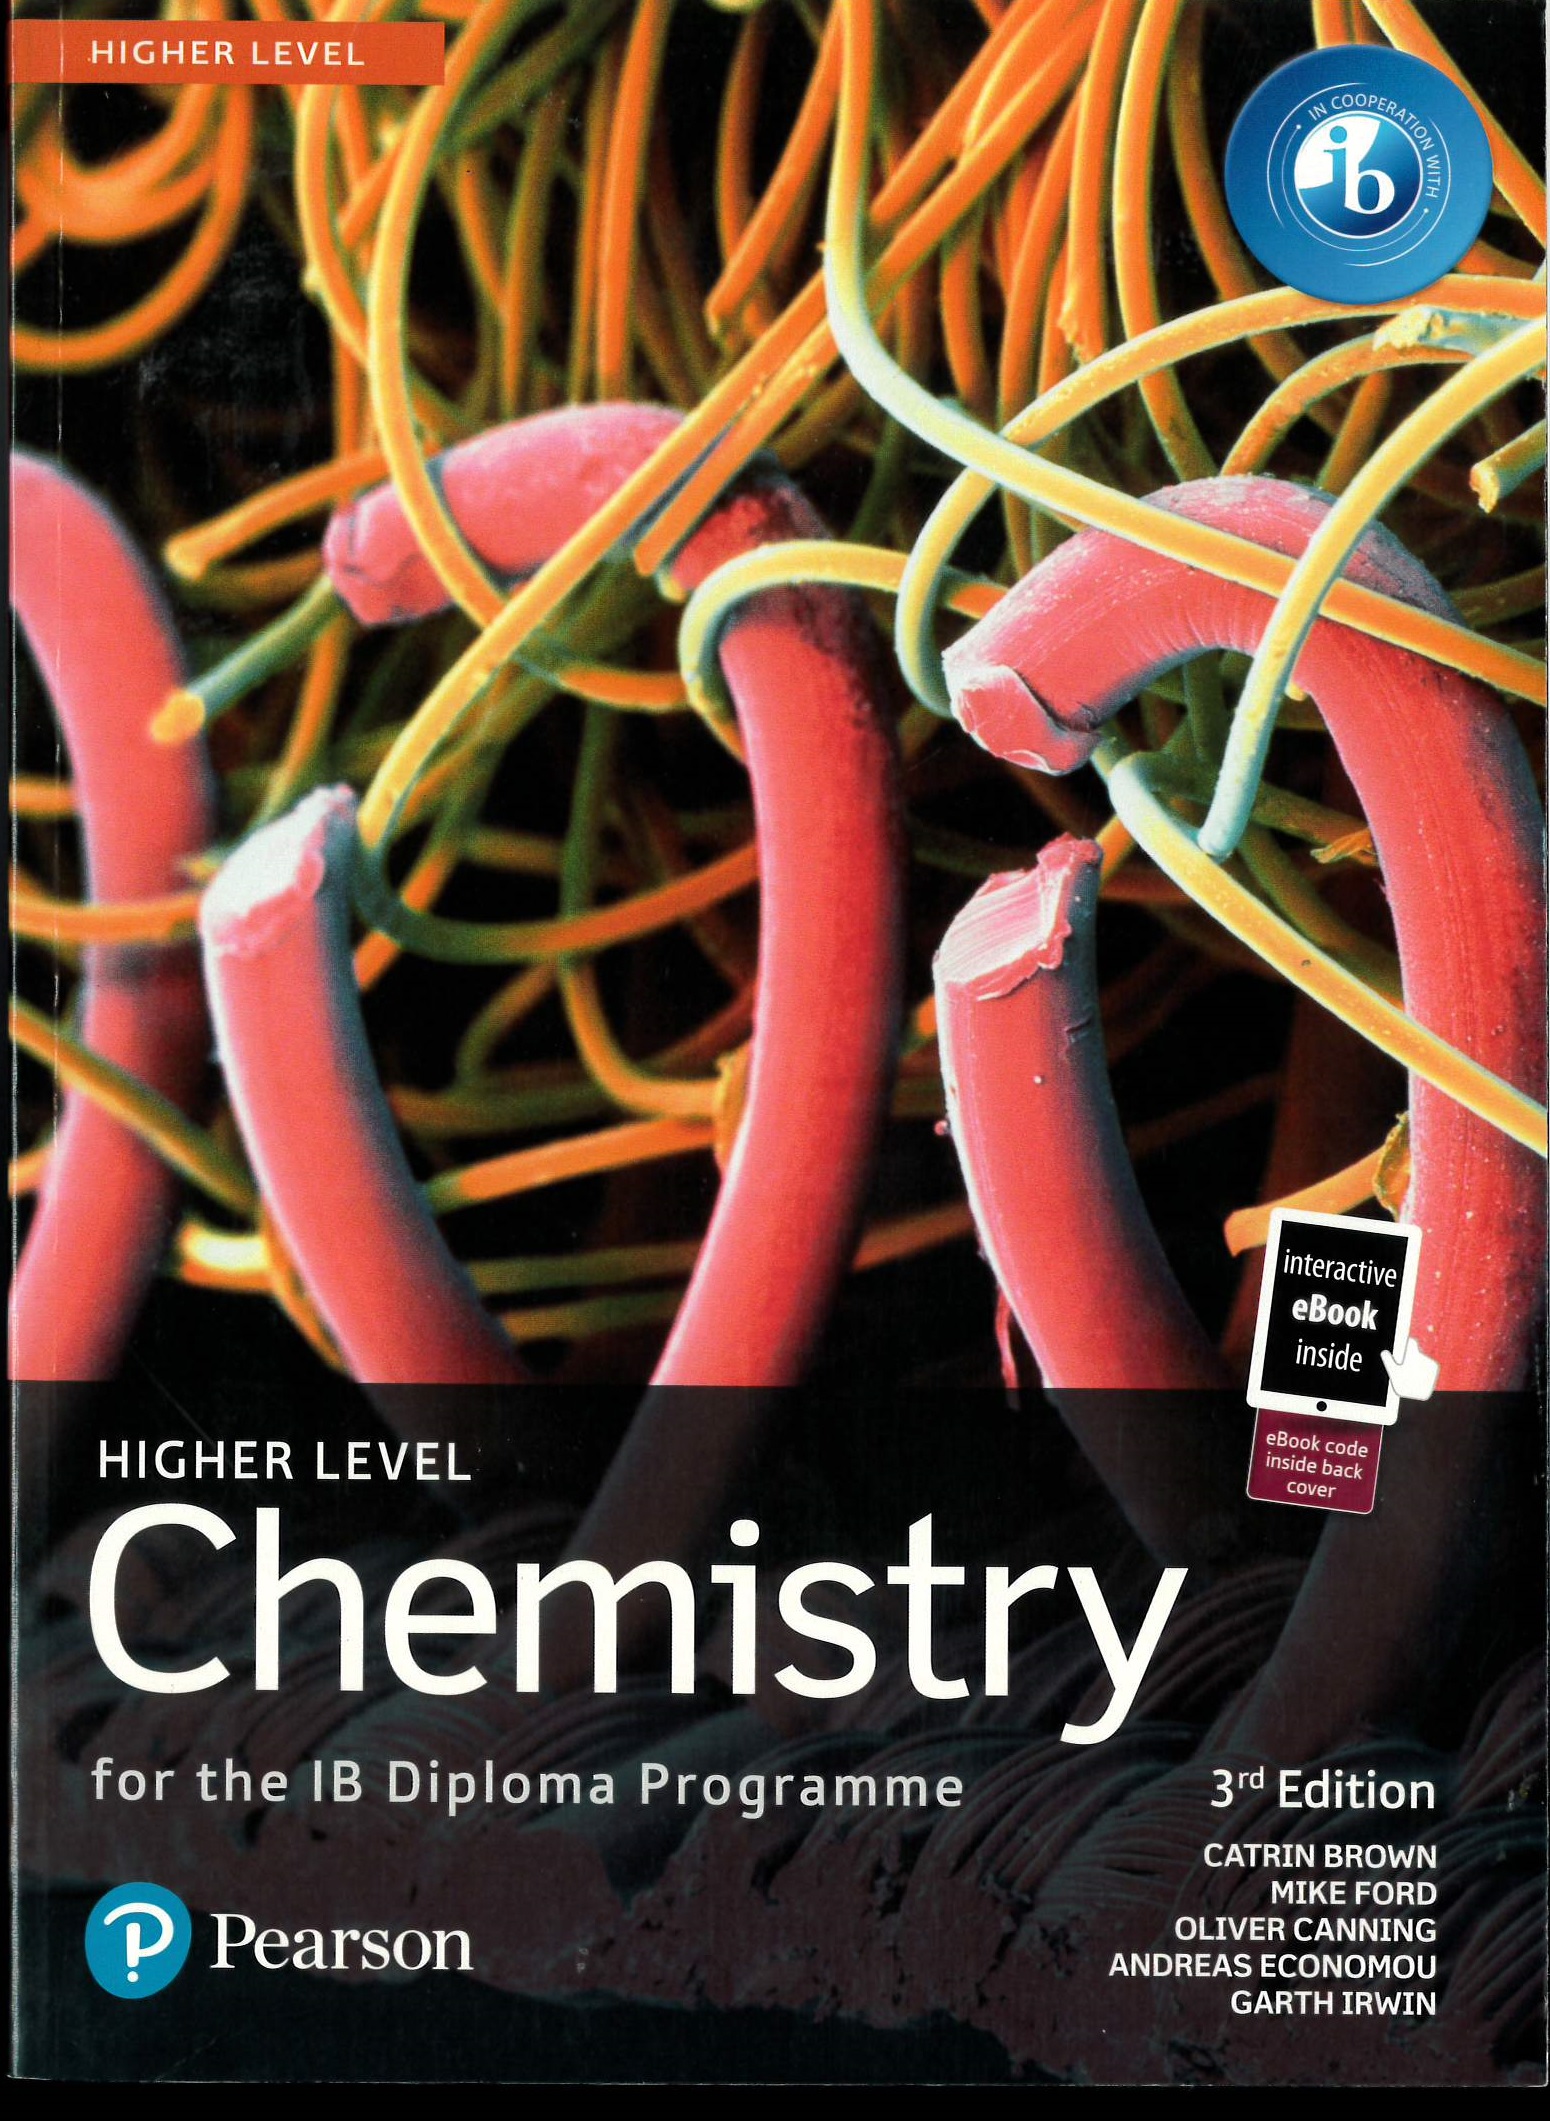 Chemistry [higher level] : for the IB diploma programme